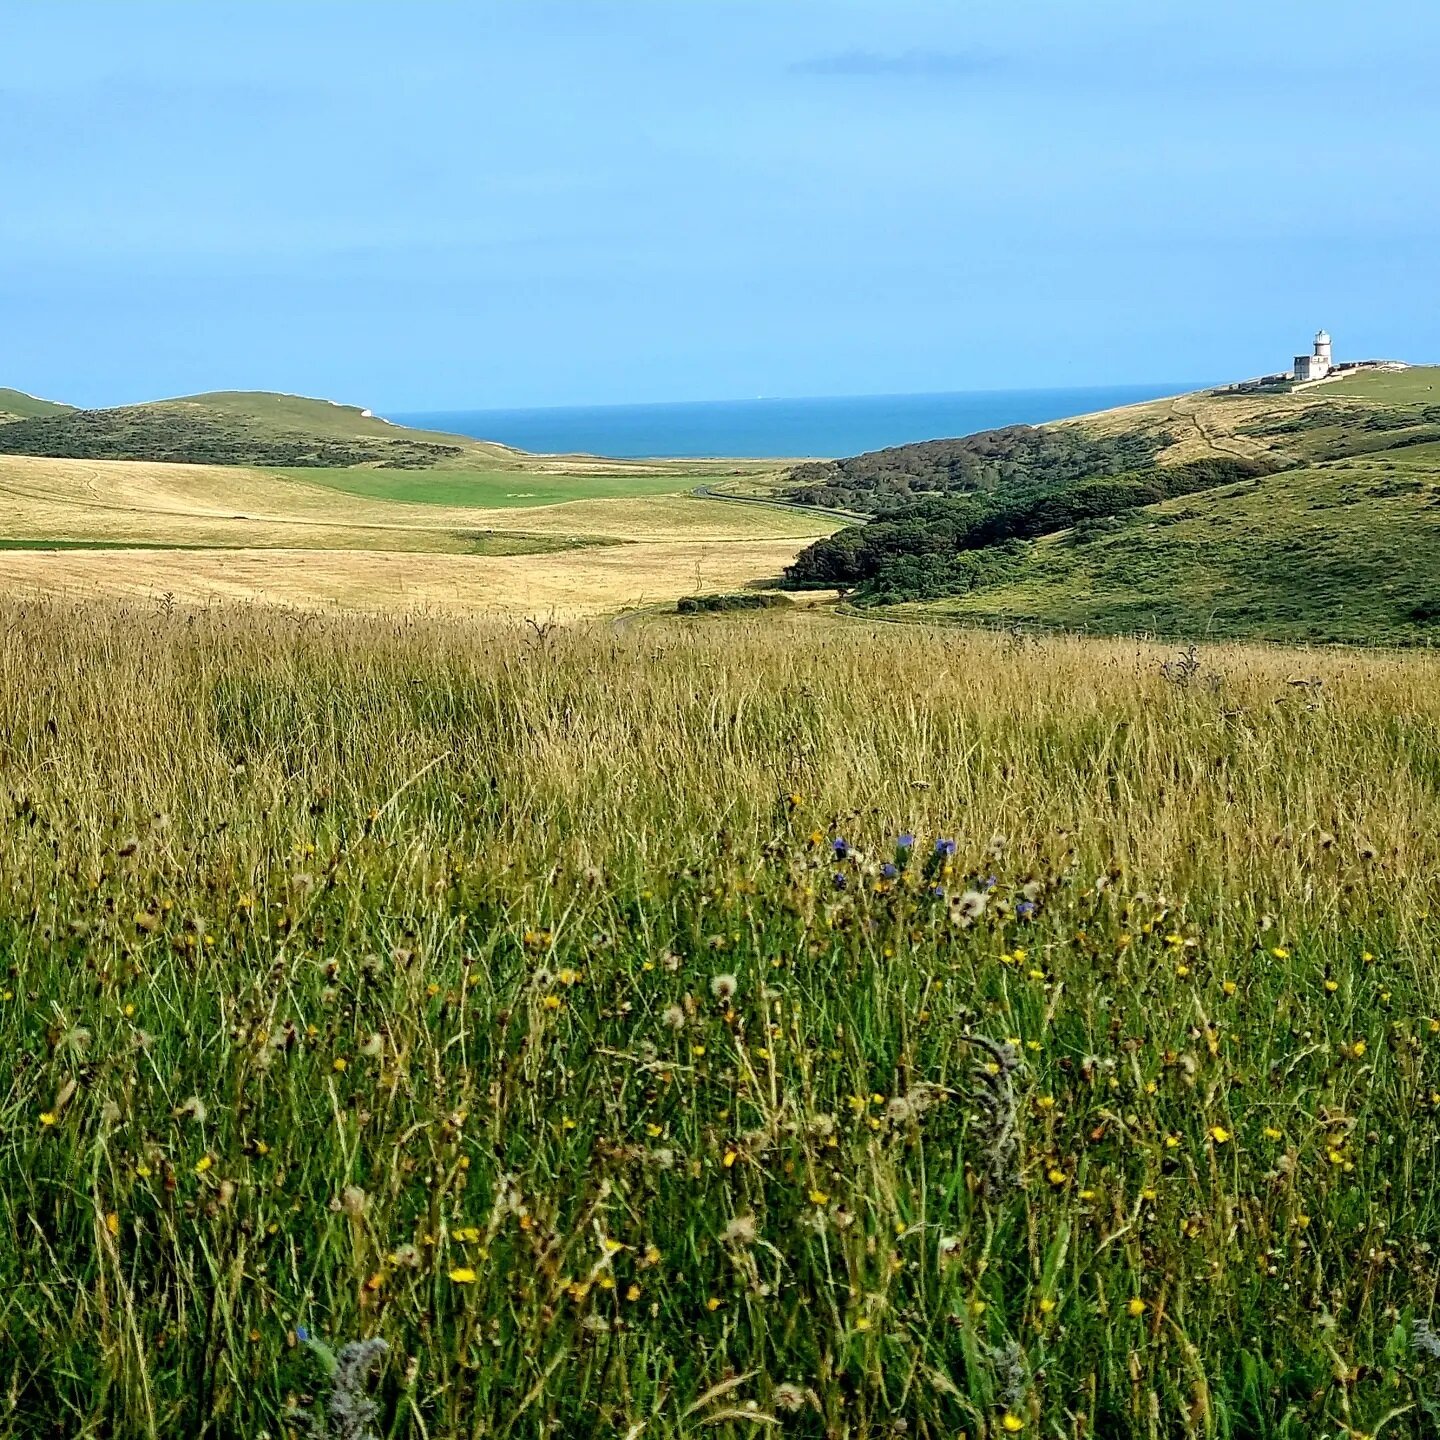 Belle Tout Lighthous is Just a short walk from #Seaford across the #sevensisters towards Burling Gap, photo says it all, stunning.